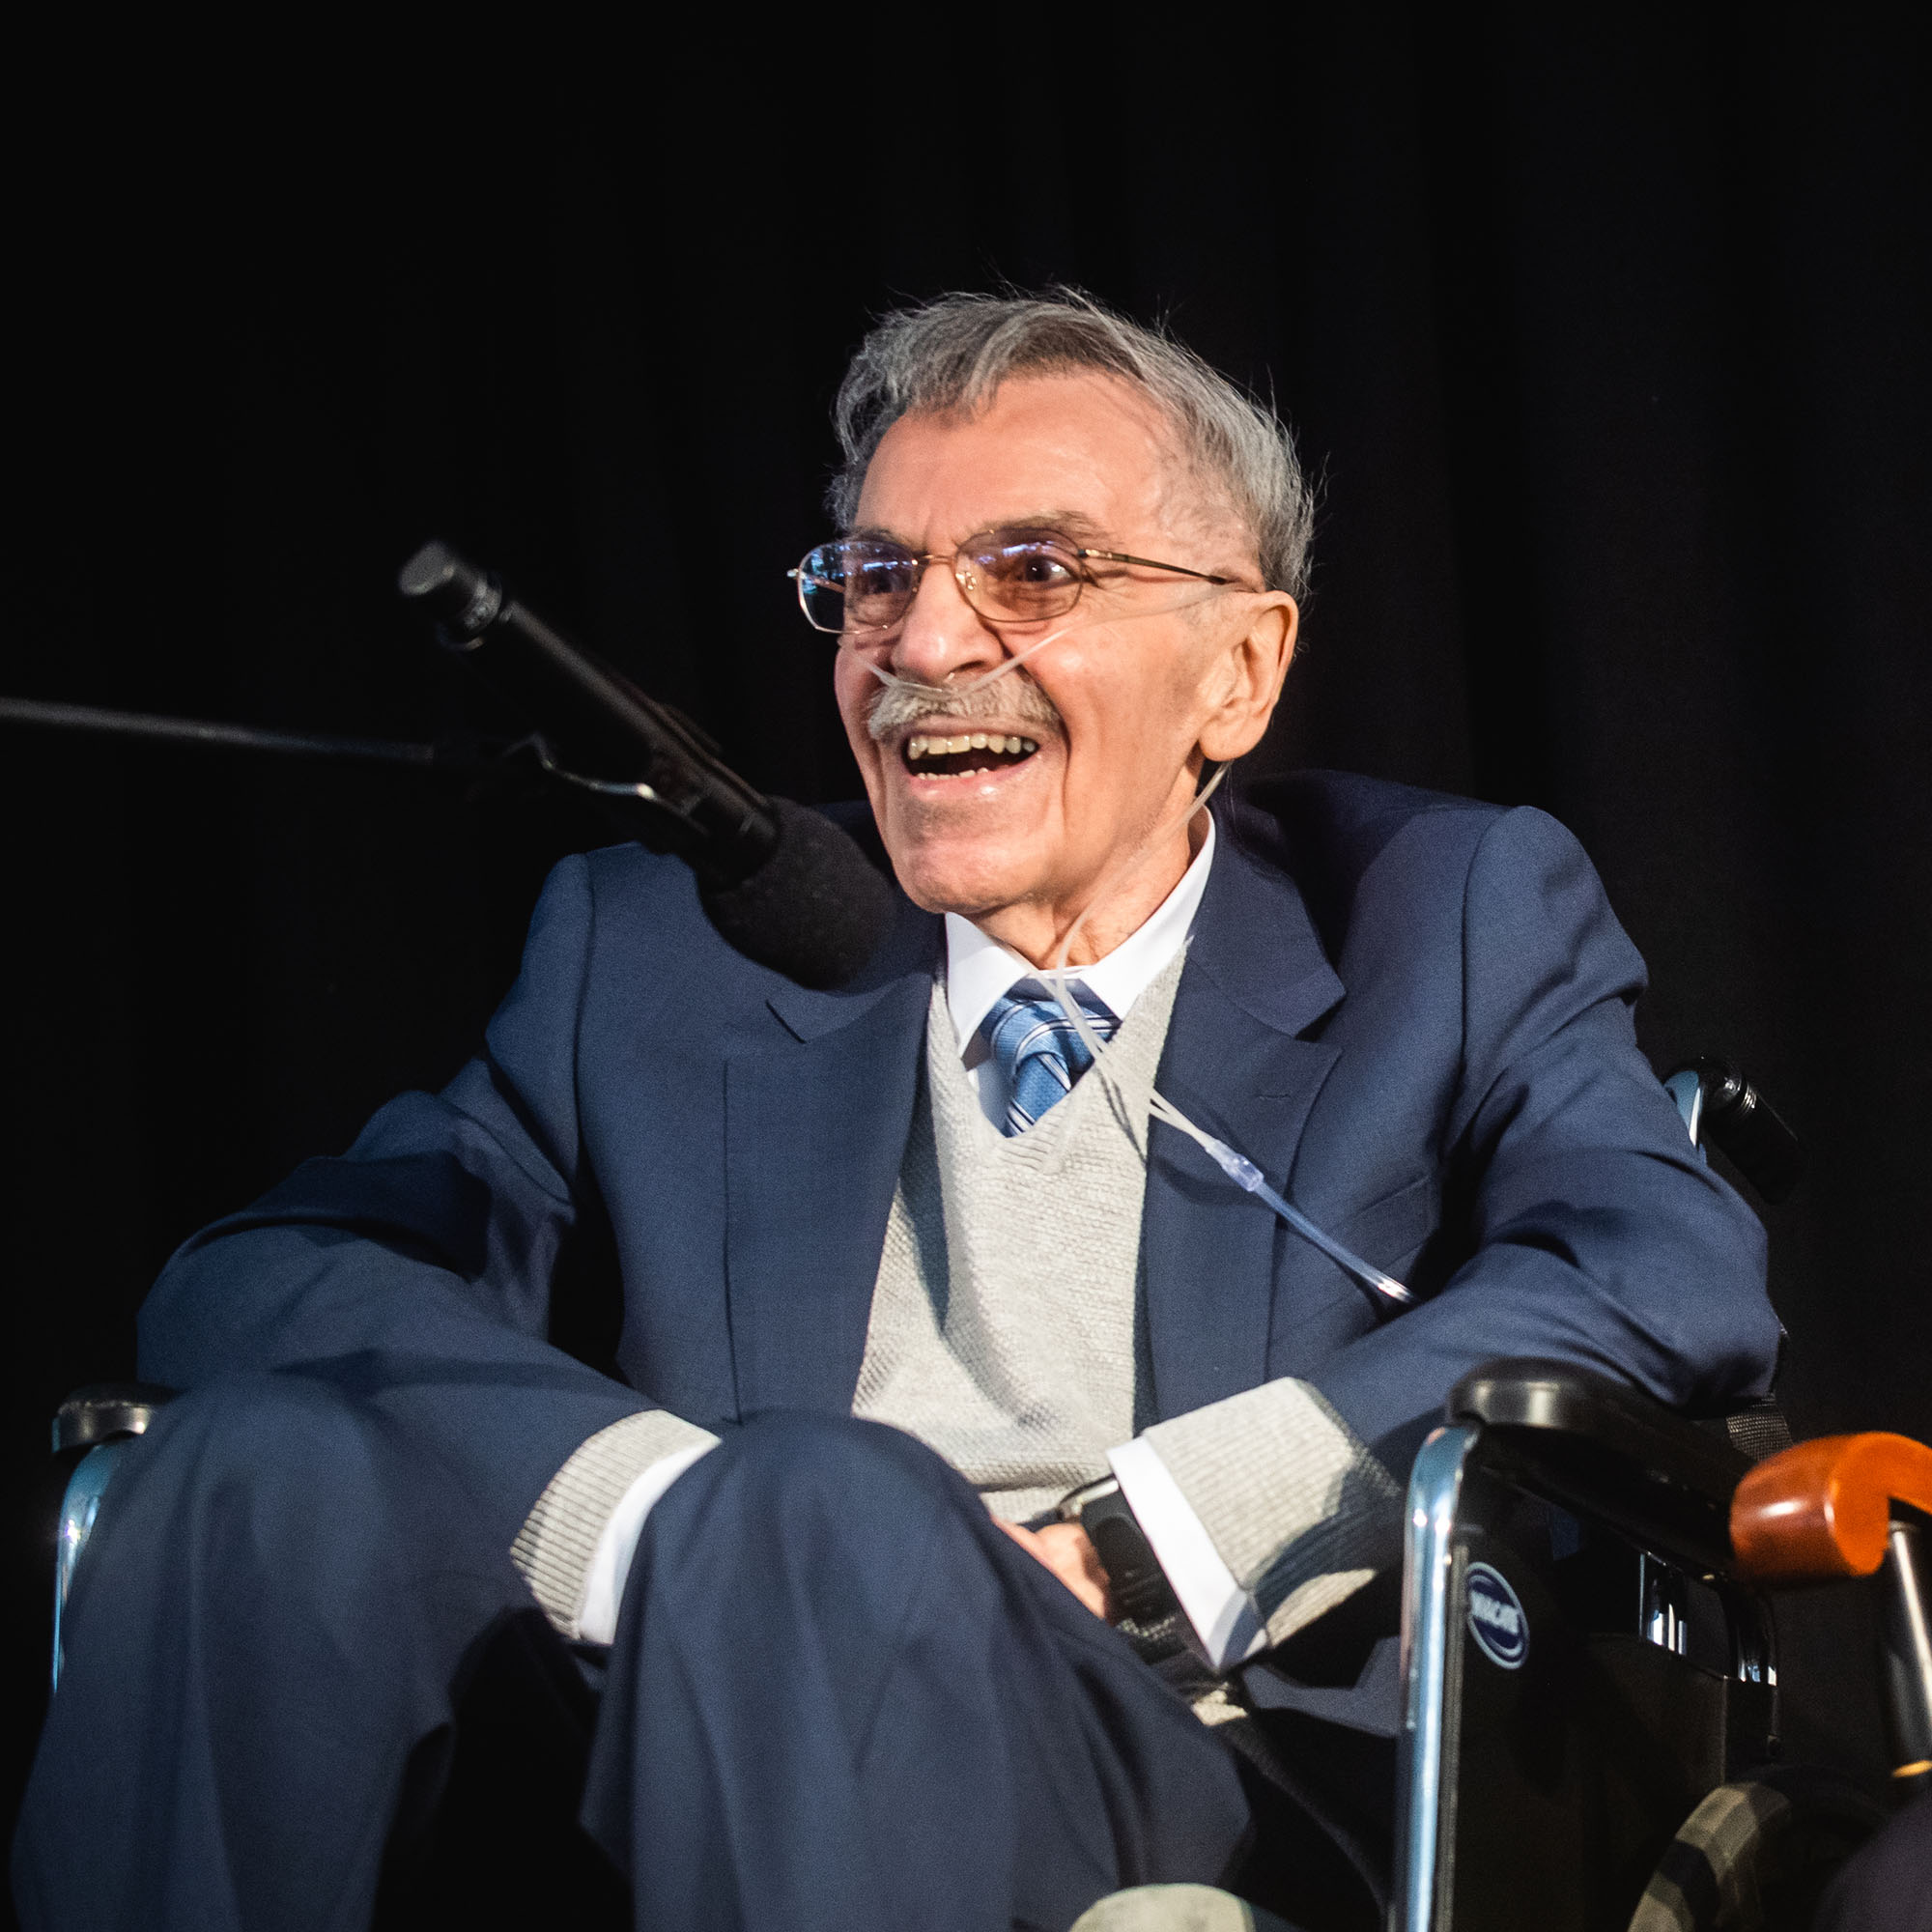 Photo: Edward Avedisian, an older man in an elegant suit, smiles at an event at Boston University in 2022